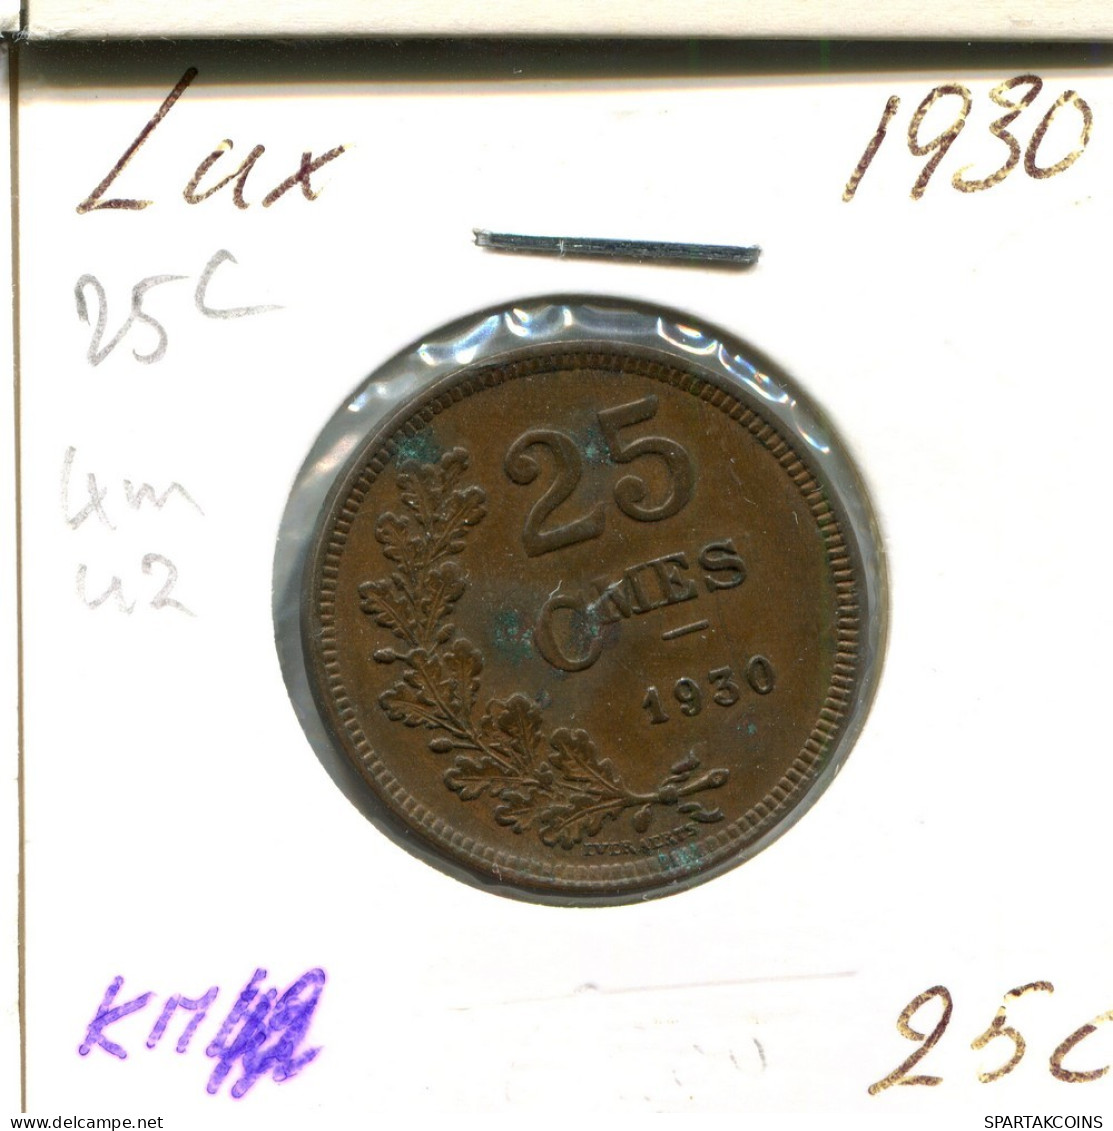 25 CENTIMES 1930 LUXEMBOURG Coin #AT189.U.A - Luxemburgo